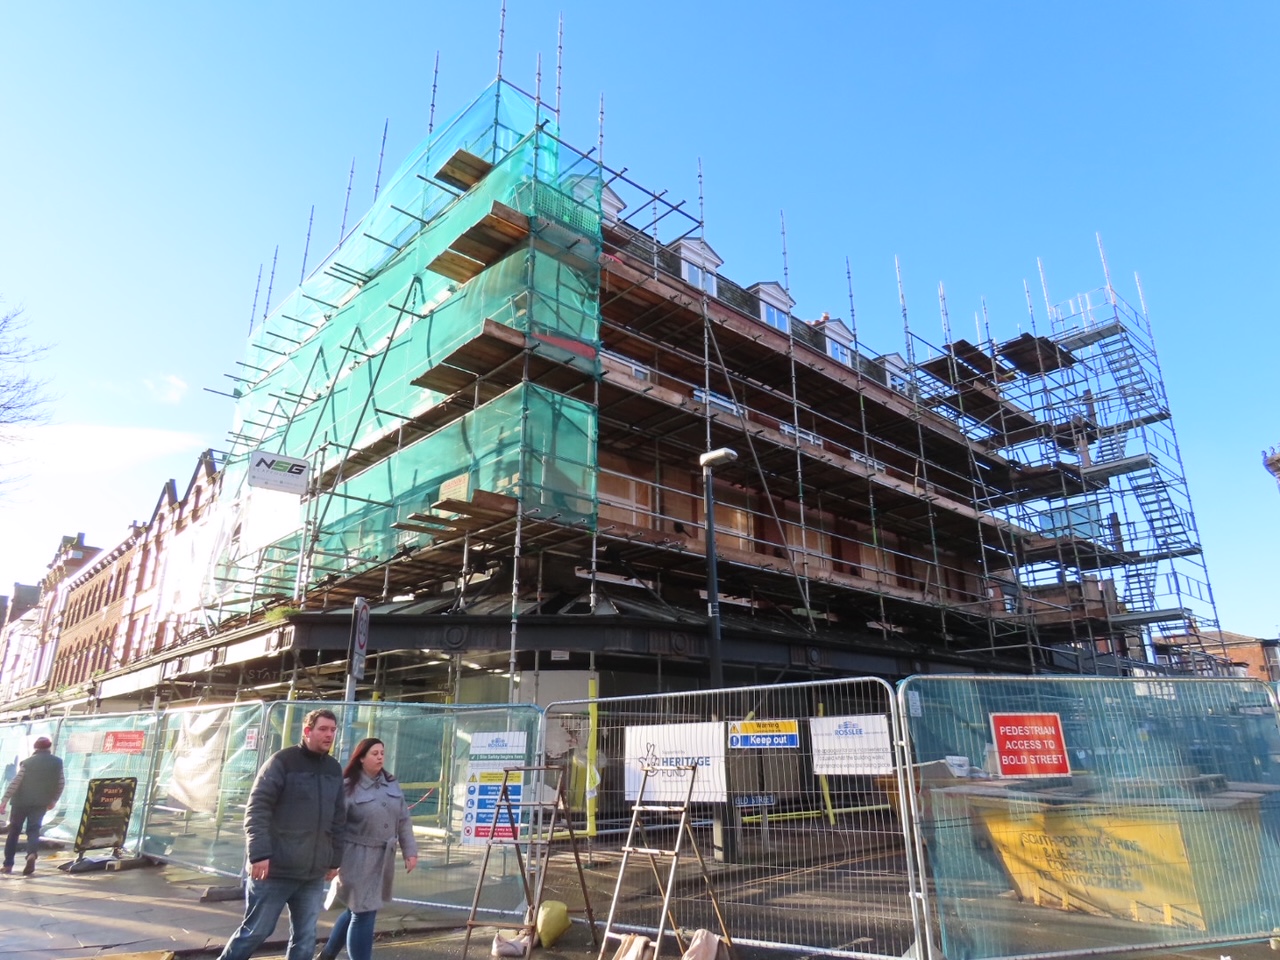 Building work is taking place at the landmark 509-151 Lord Street in Southport. Photo by Andrew Brown Media